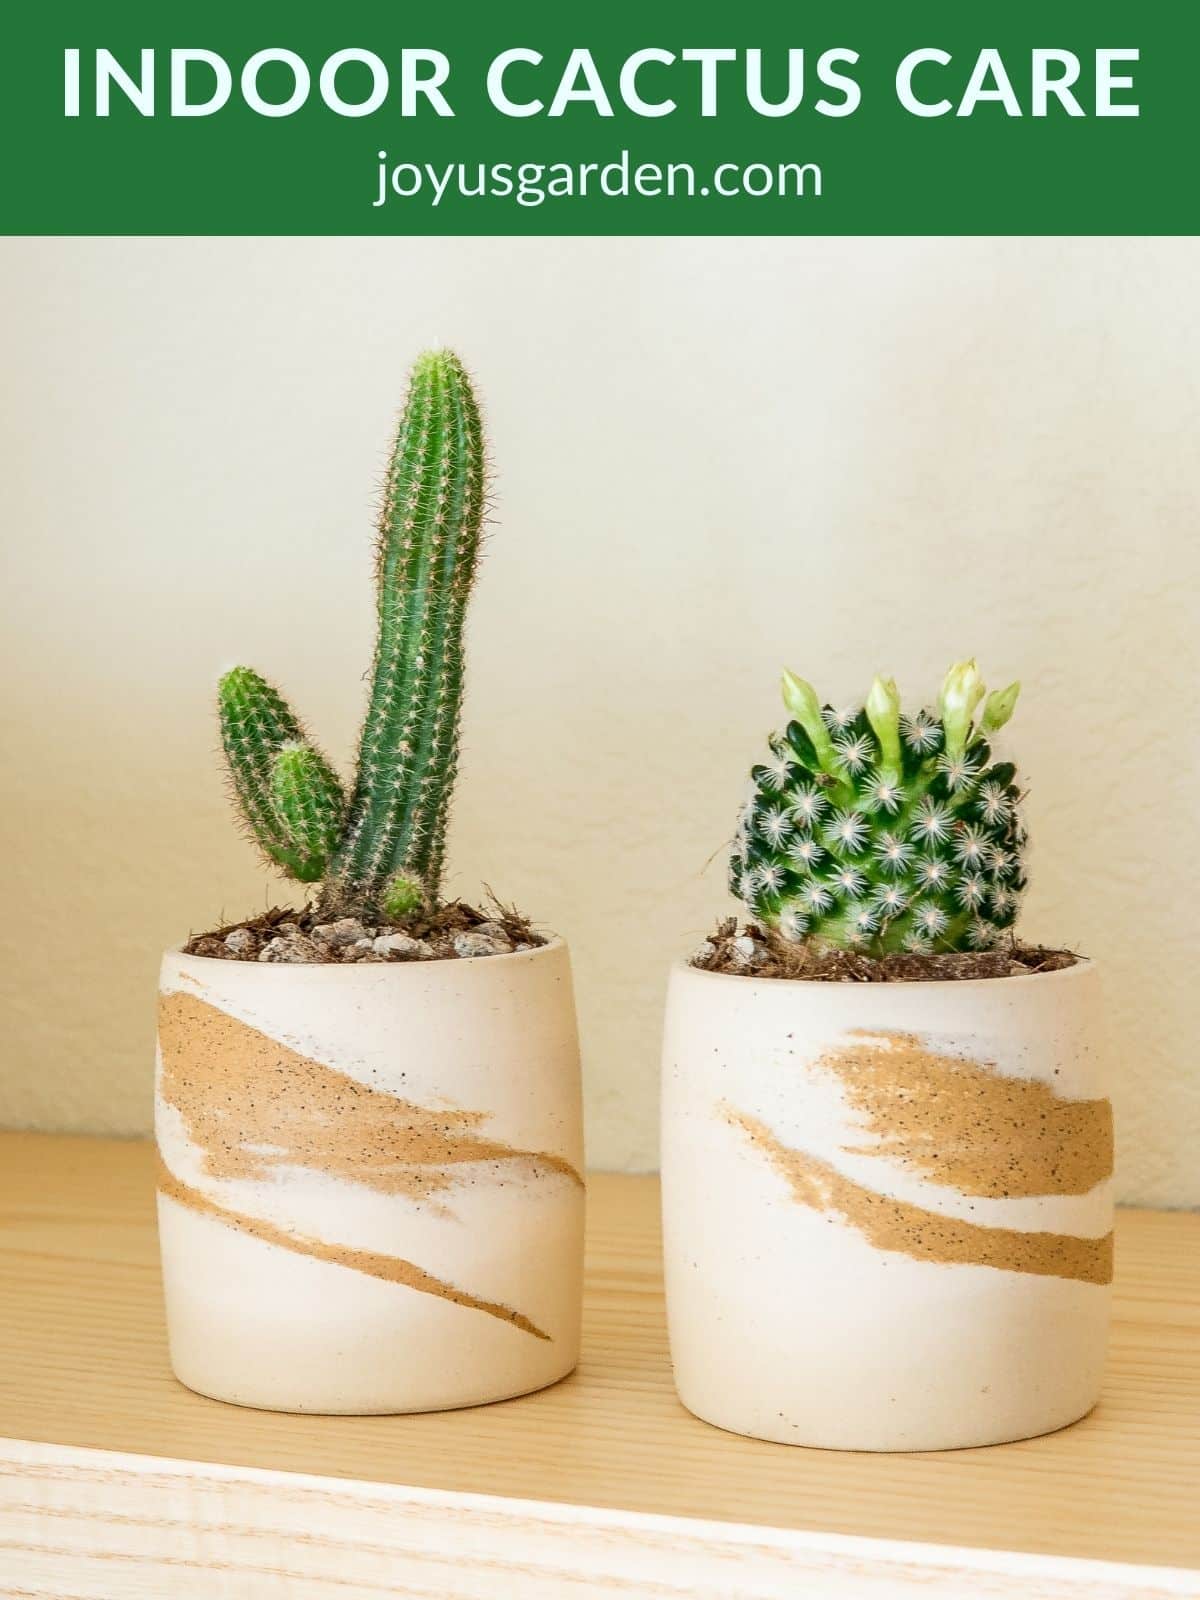 2 mall cacti in small decorative pots the text at the top reads indoor cactus care joyusgarden.com